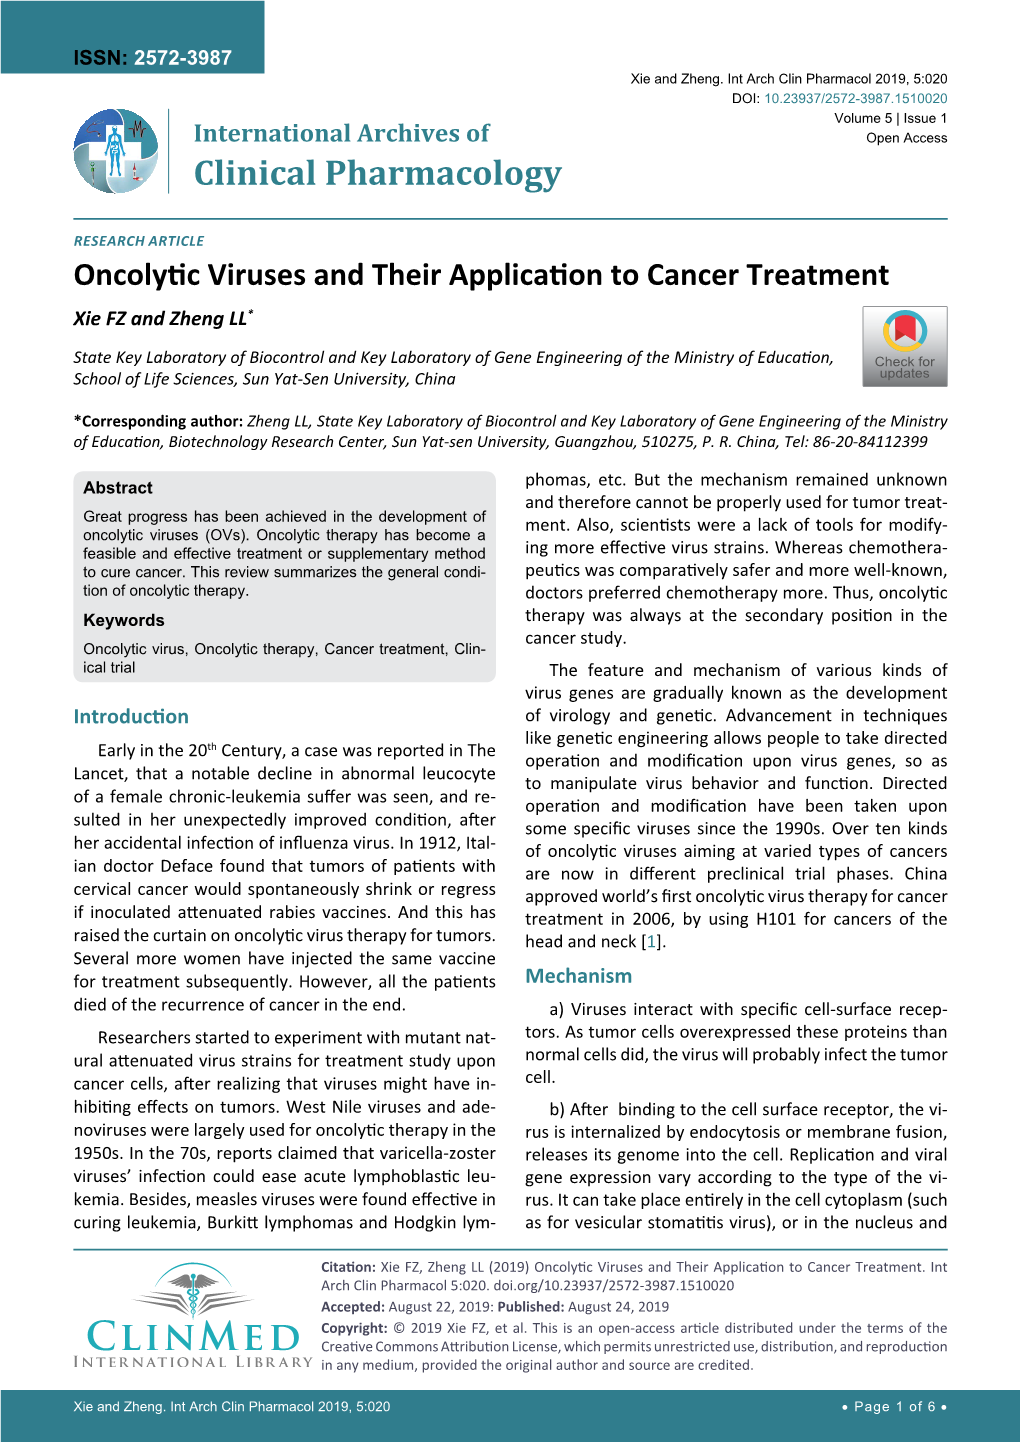 Oncolytic Viruses and Their Application to Cancer Treatment Xie FZ and Zheng LL*